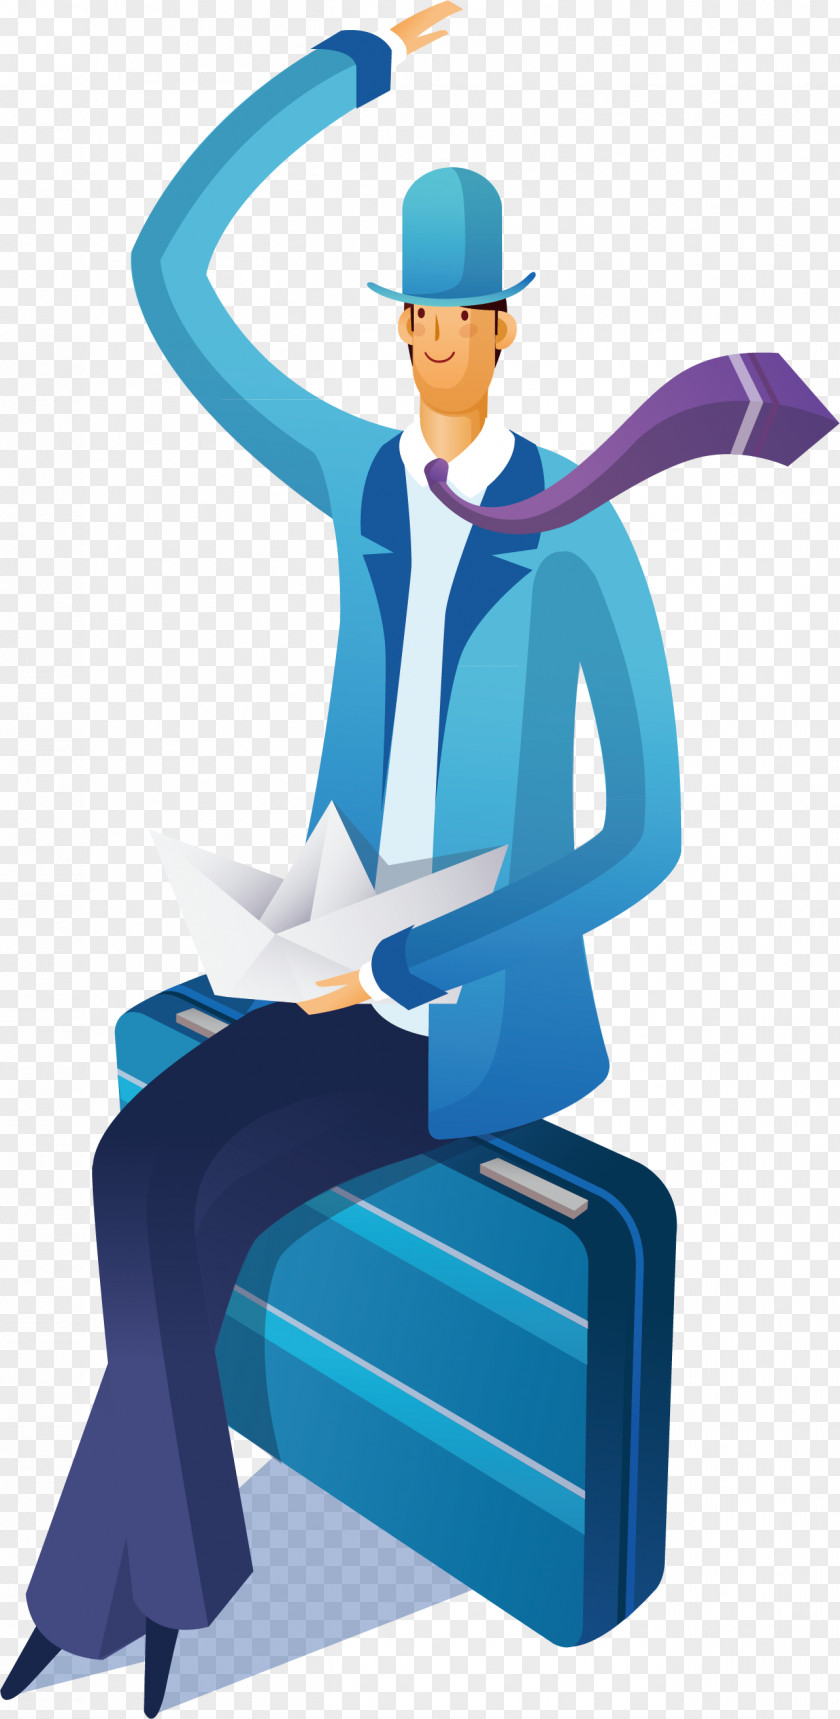 Cartoon Man Sitting On A Suitcase Waving Vector Clip Art PNG